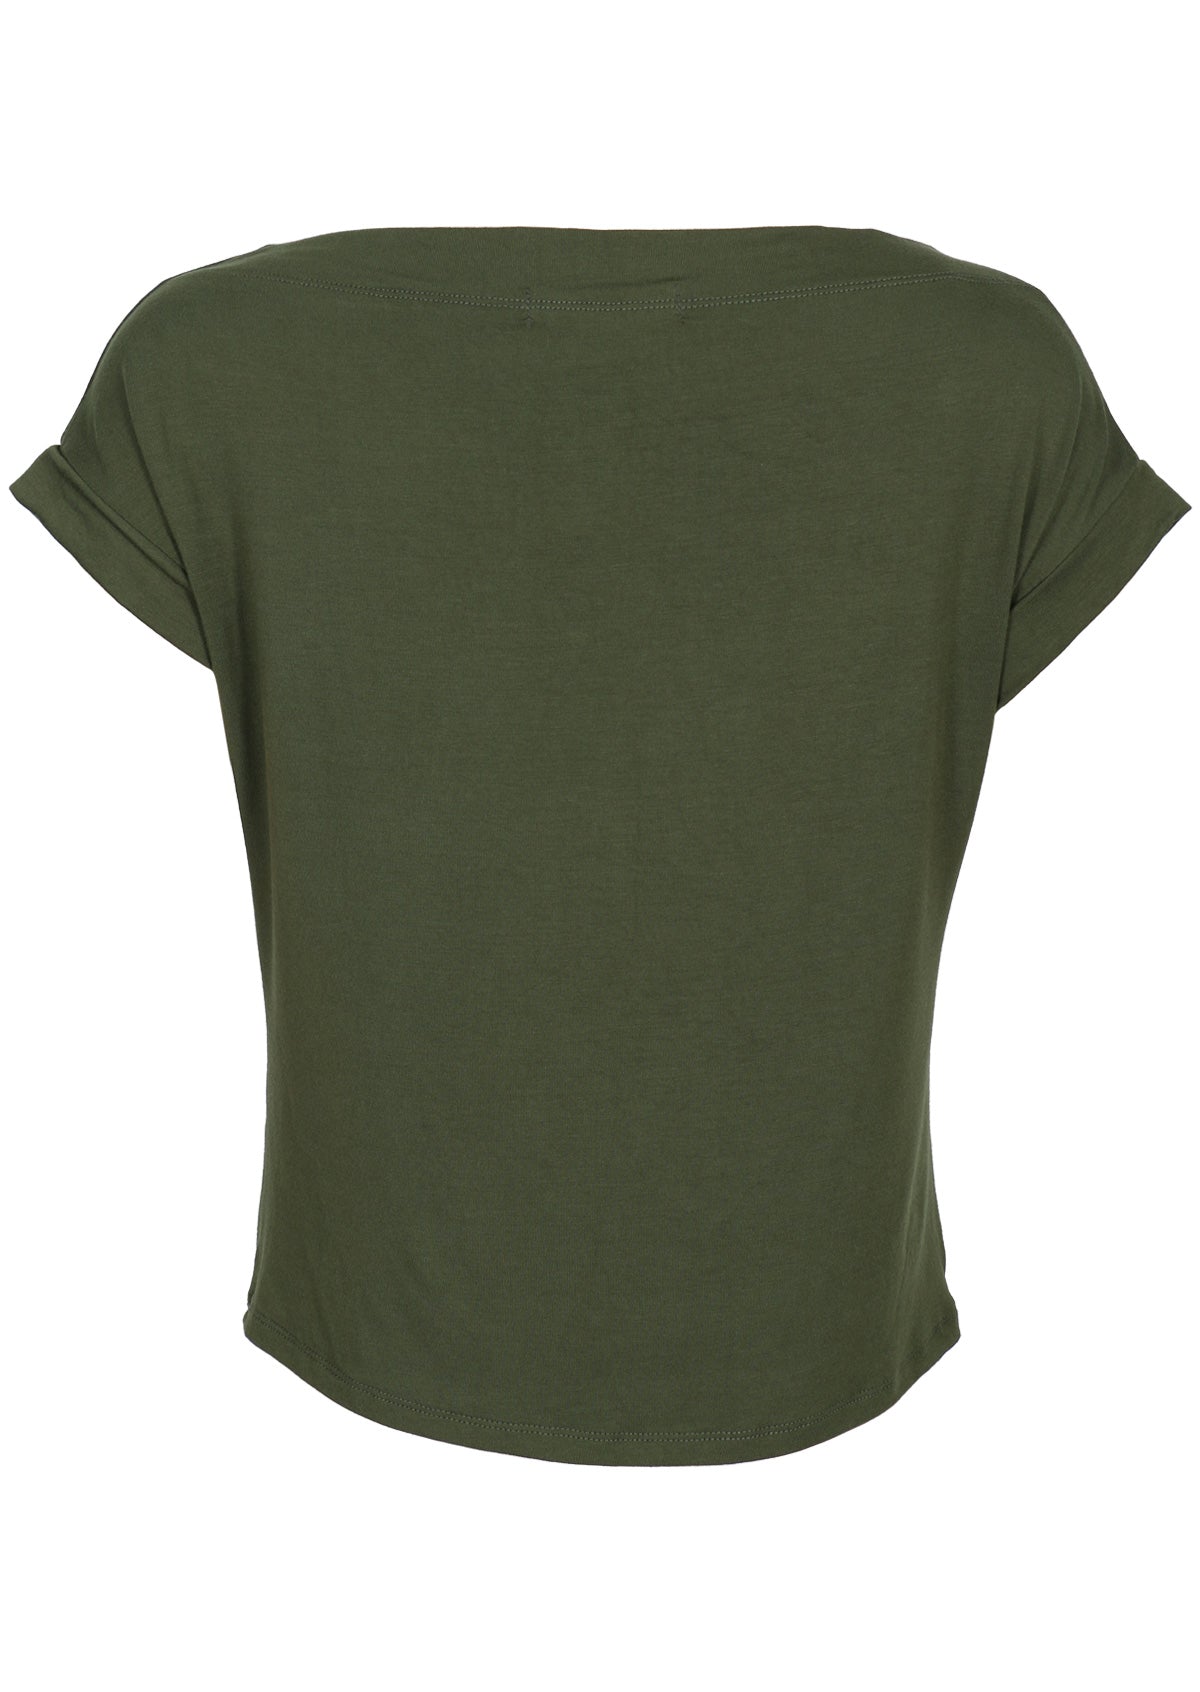 Back view of women's wide neck mod olive green stretch rayon boat neck top